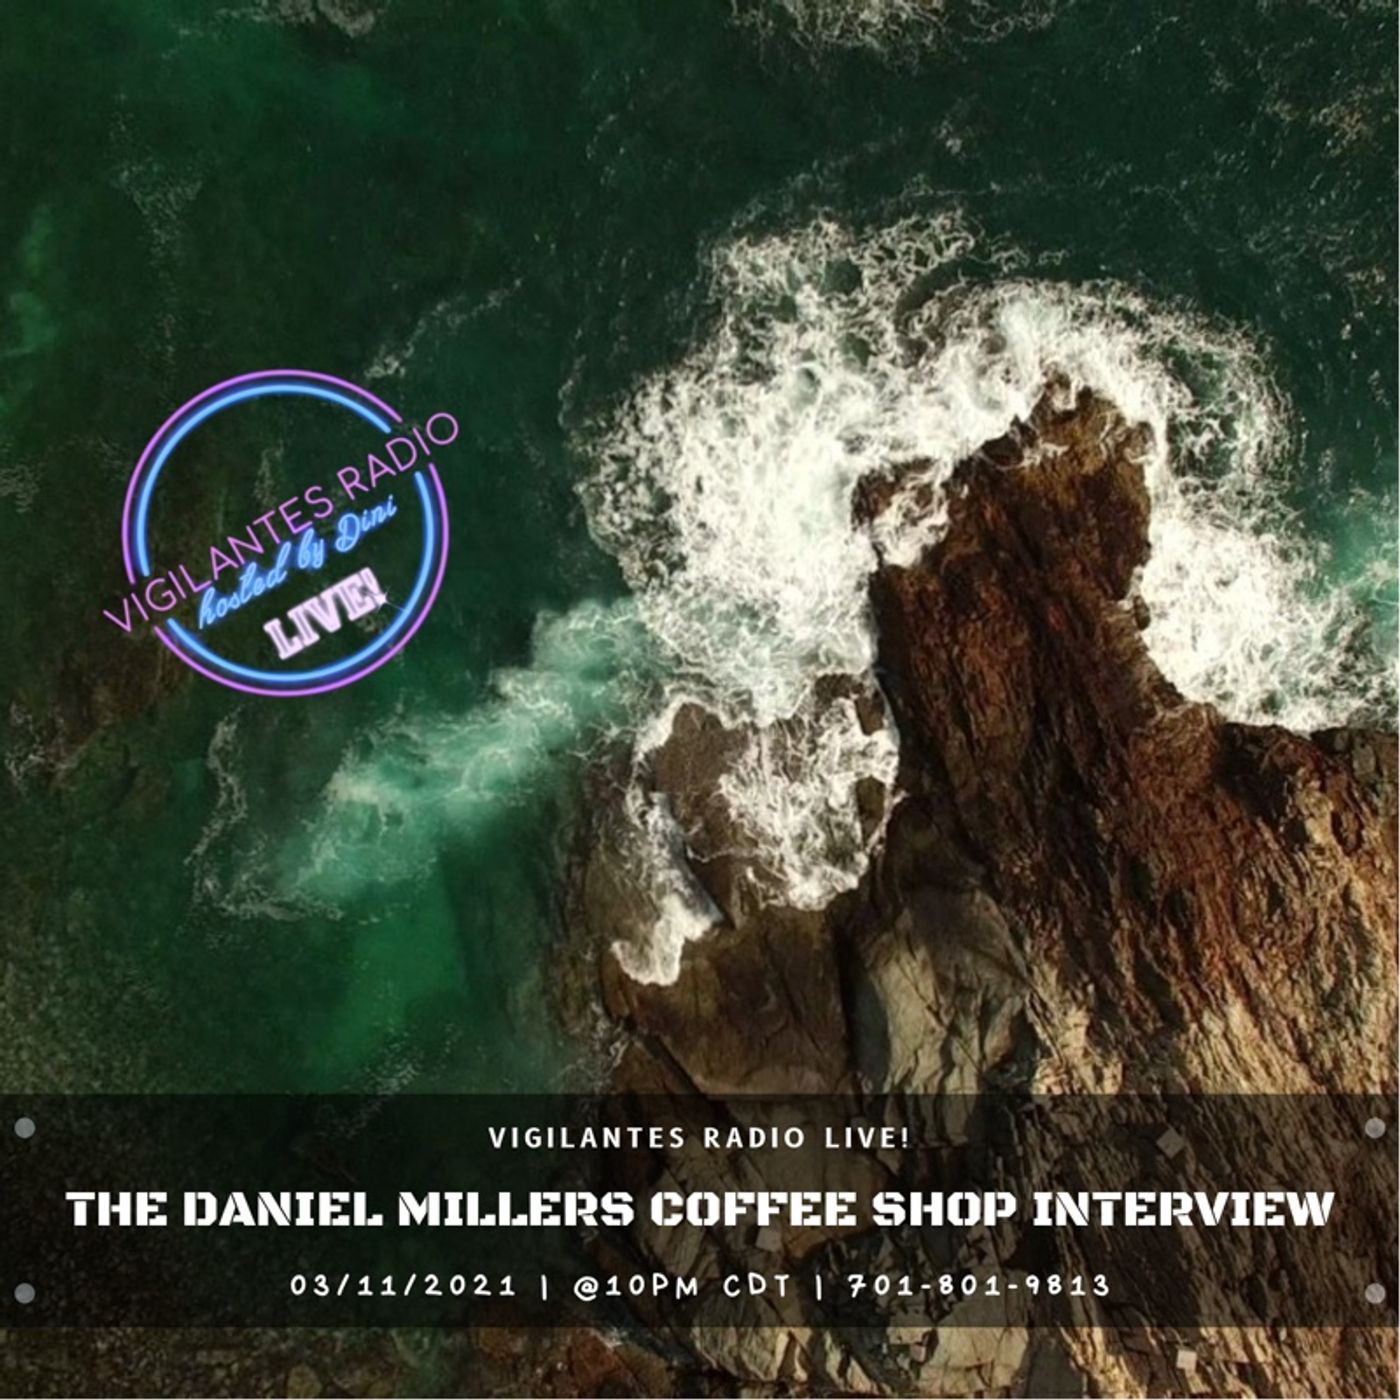 The Daniel Millers Coffee Shop Interview. Image